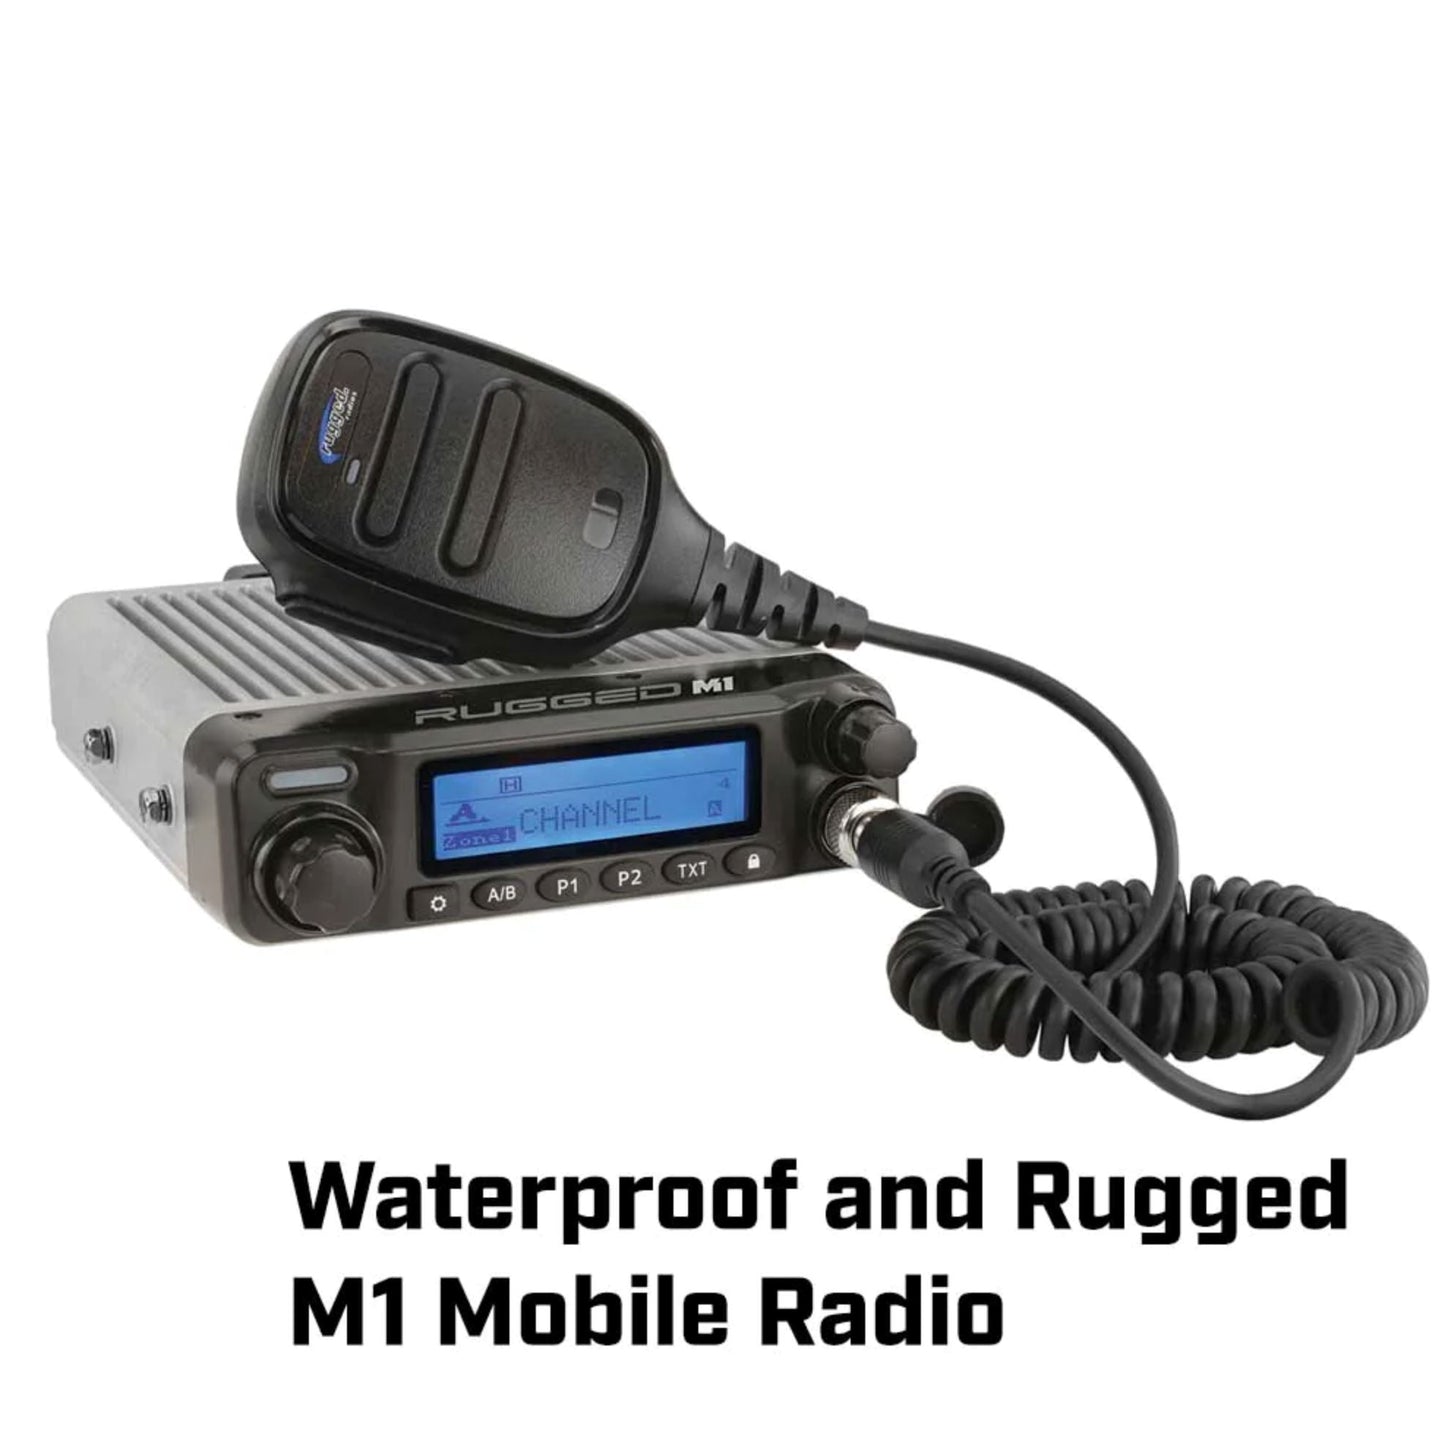 Rugged Radios 2 Person - STX STEREO Complete Communication Intercom System - with STX STEREO Headsets